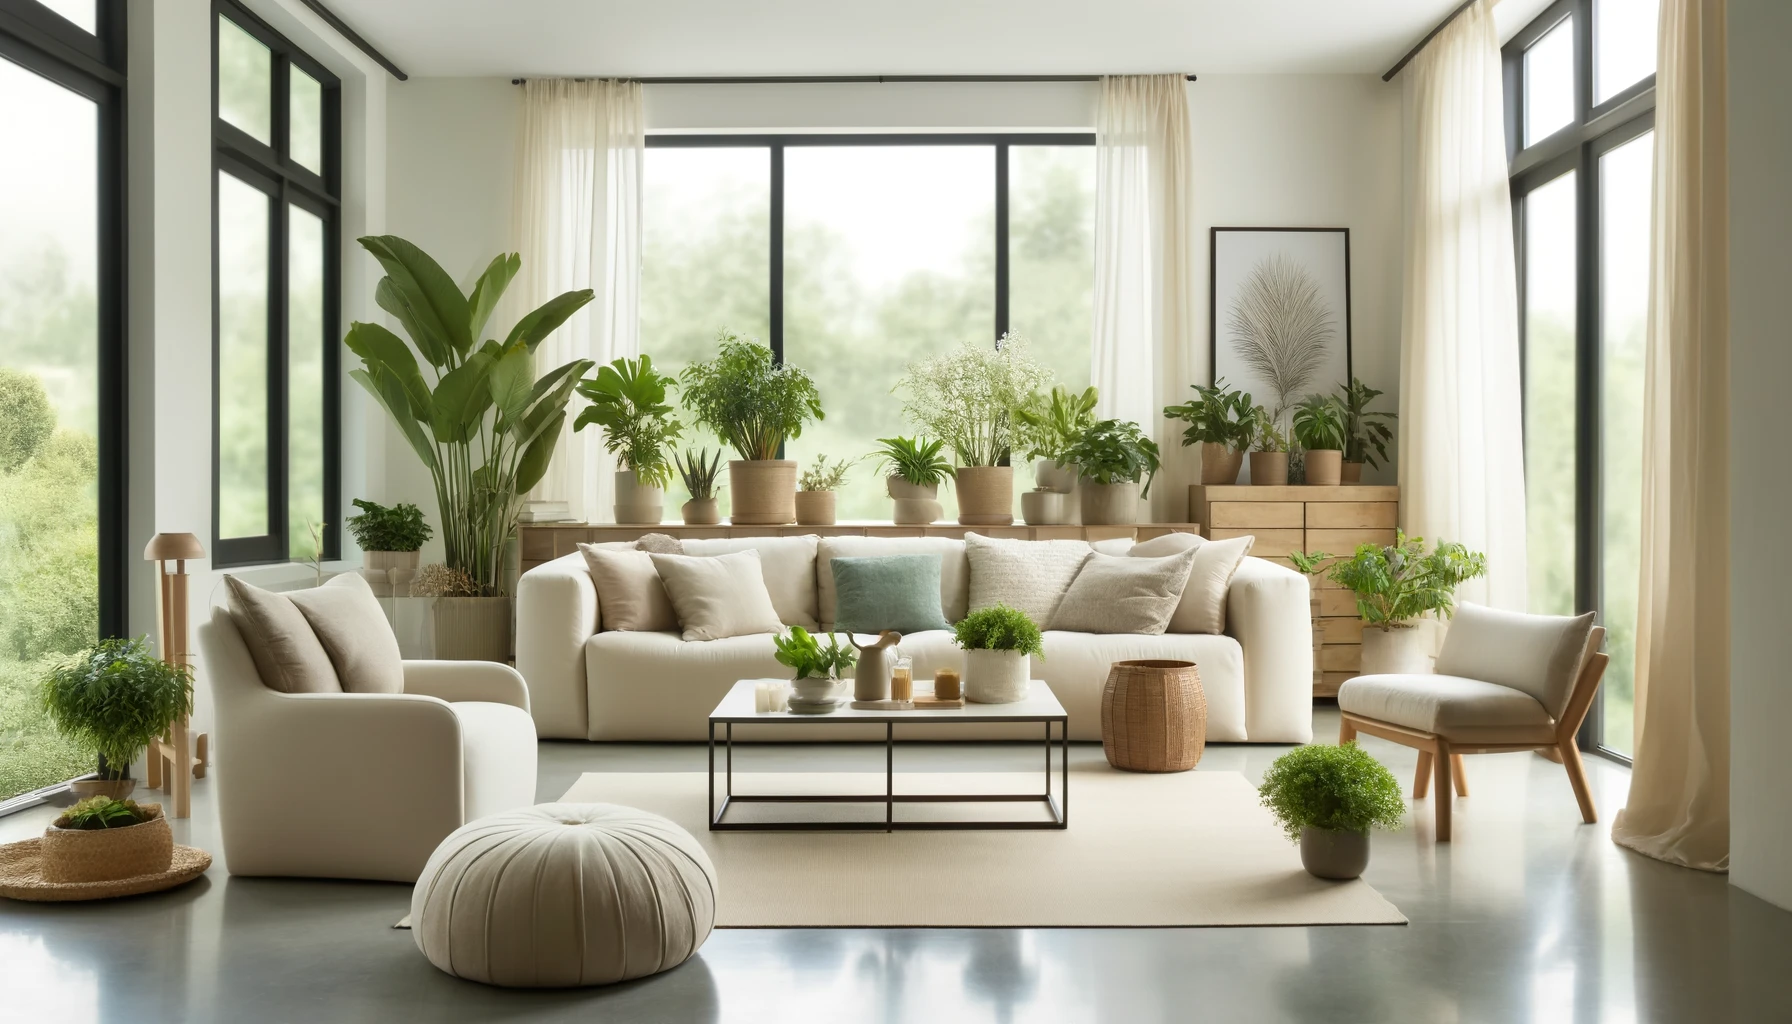 a beautifully arranged living room that embodies tranquility and mindfulness